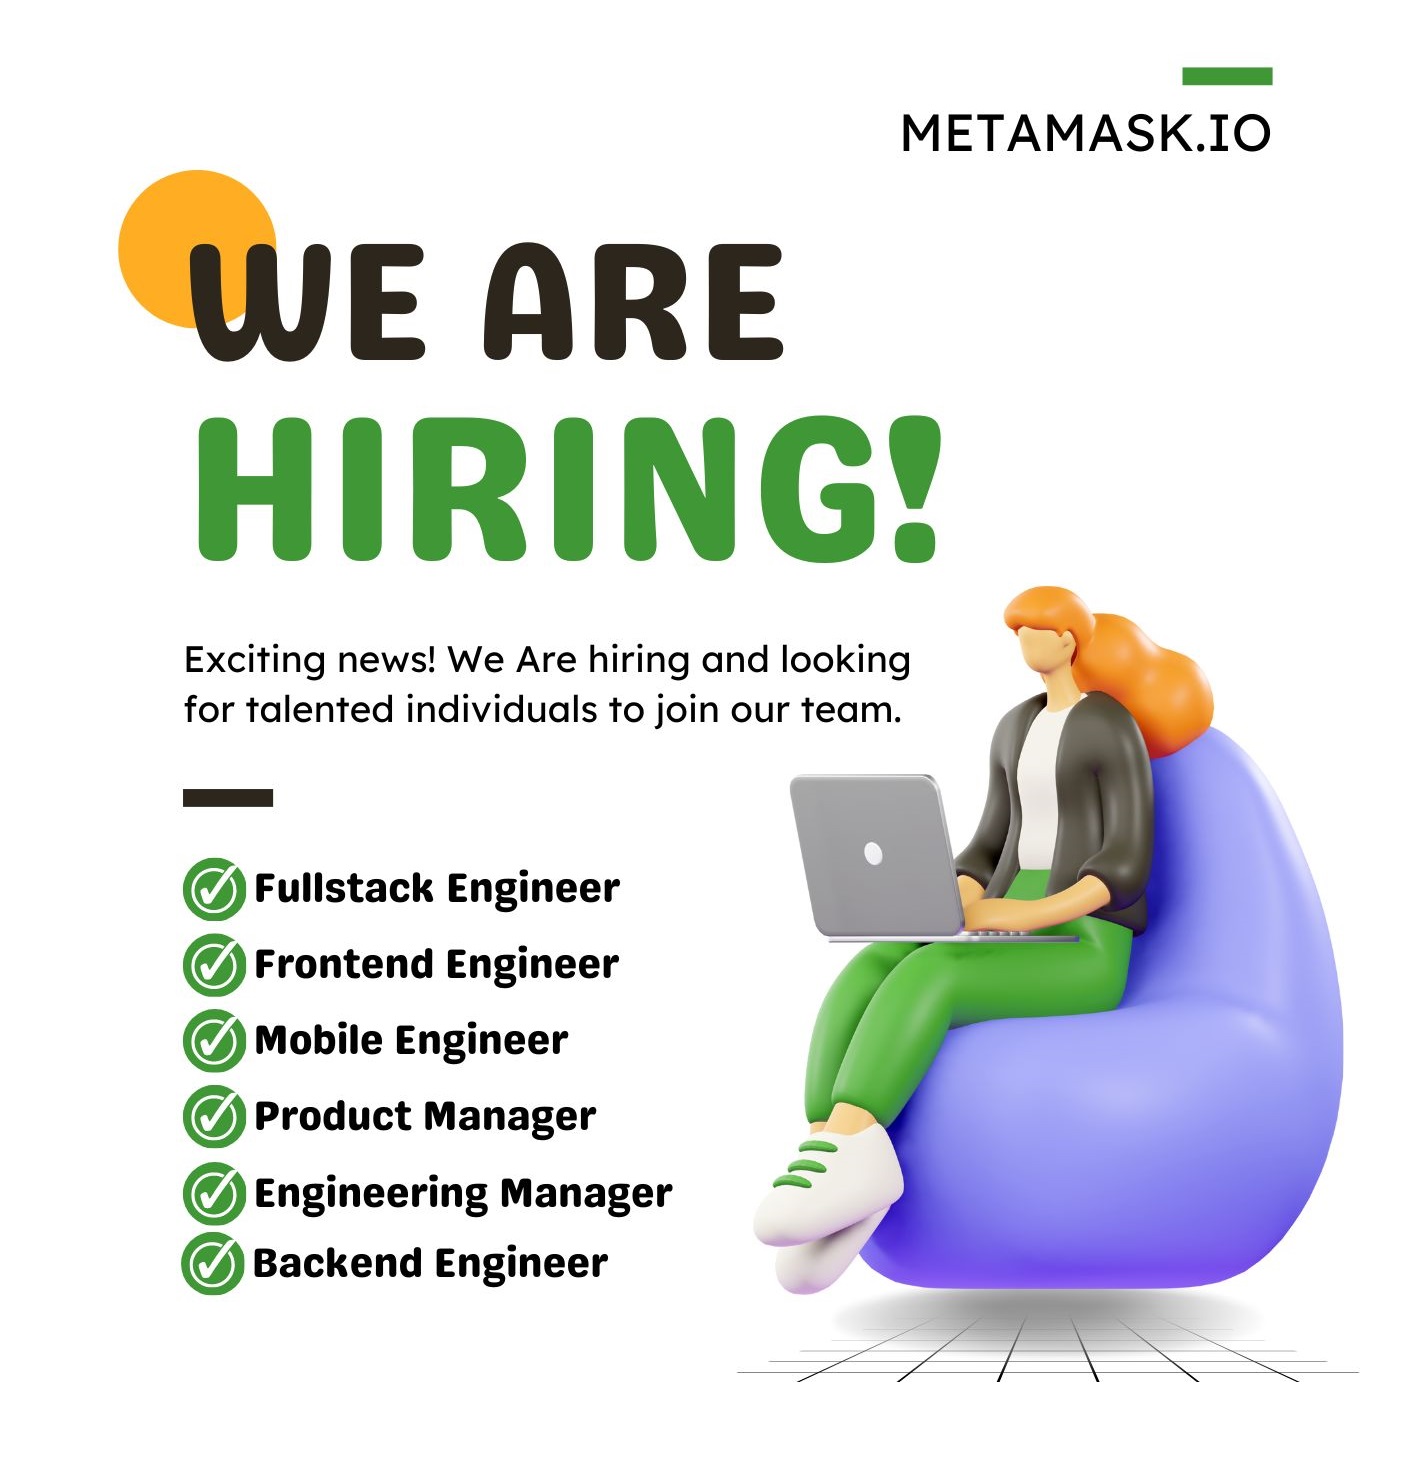 Remote Product Managers Needed at METAMASK